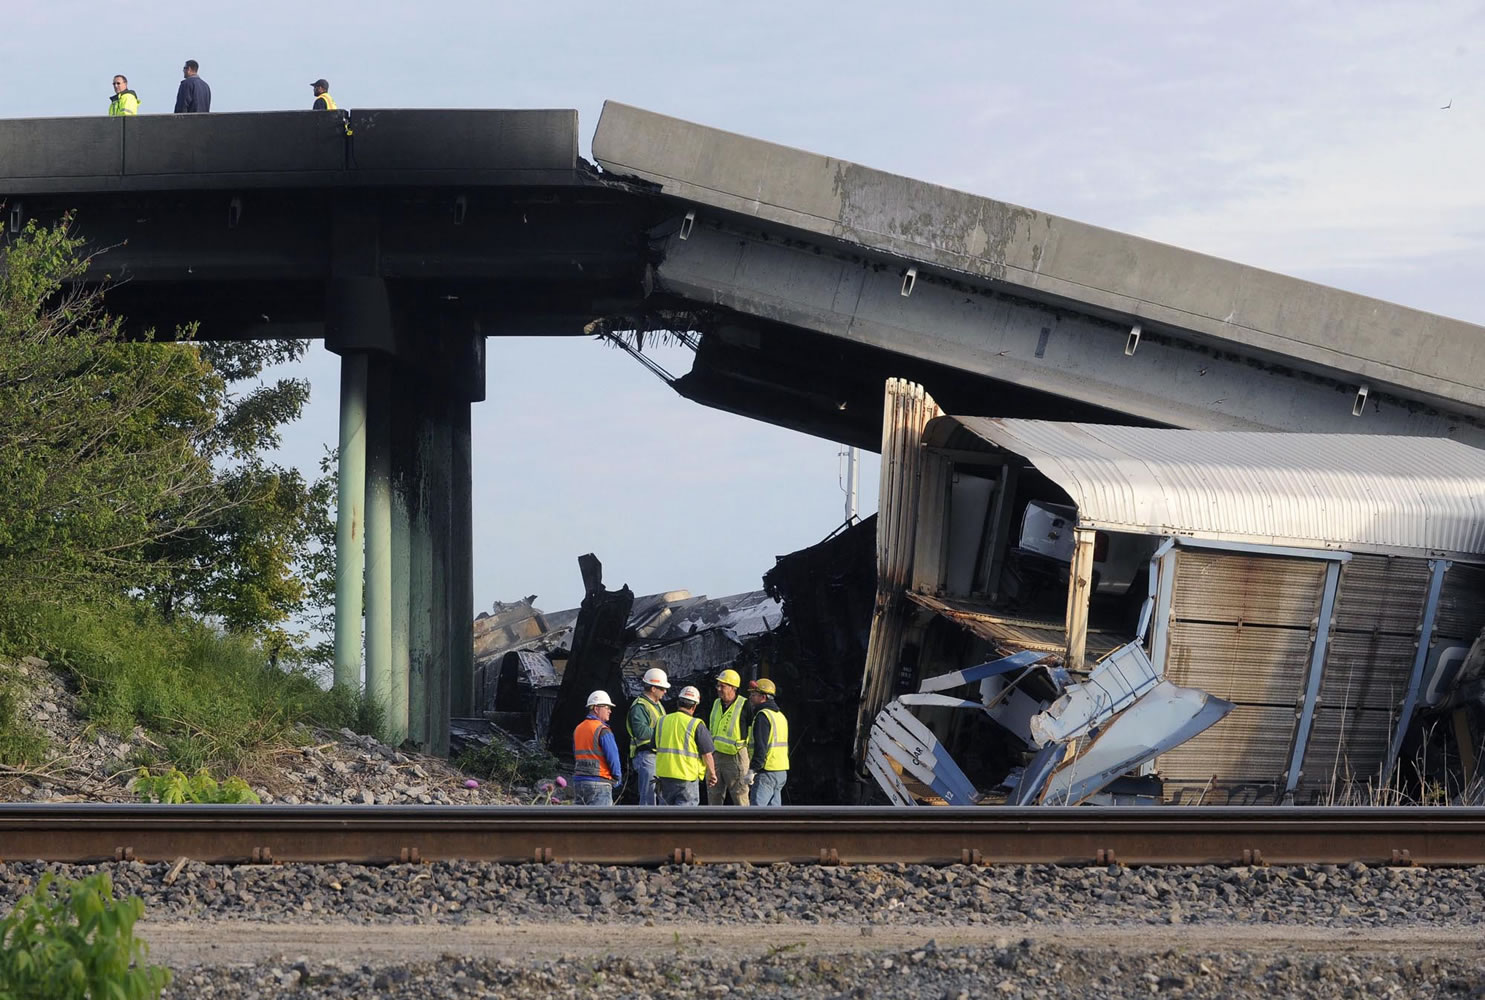 Emergency personnel investigate the Route M overpass at Rockview, Mo., about 10 miles south of Cape Girardeau, after it collapsed onto the railroad tracks Saturday.